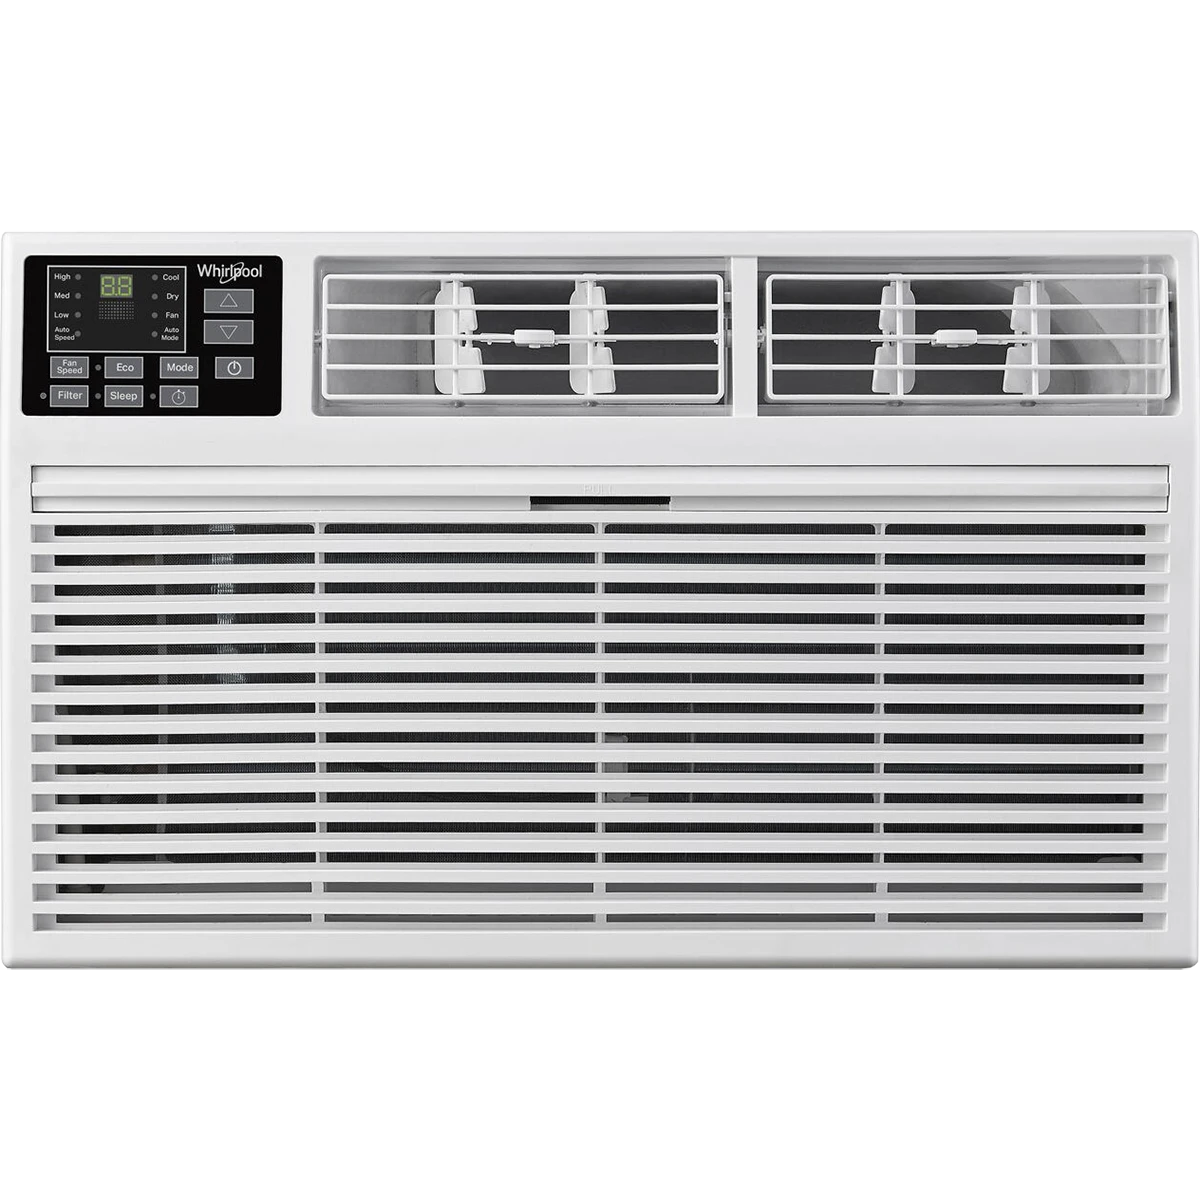 Whirlpool 12,000 BTU 230V Through-the-Wall AC, Dehumidifer for Rooms up to 550 Sq. ft Remote Control Digital Display Timer (WHAT122-2AW)